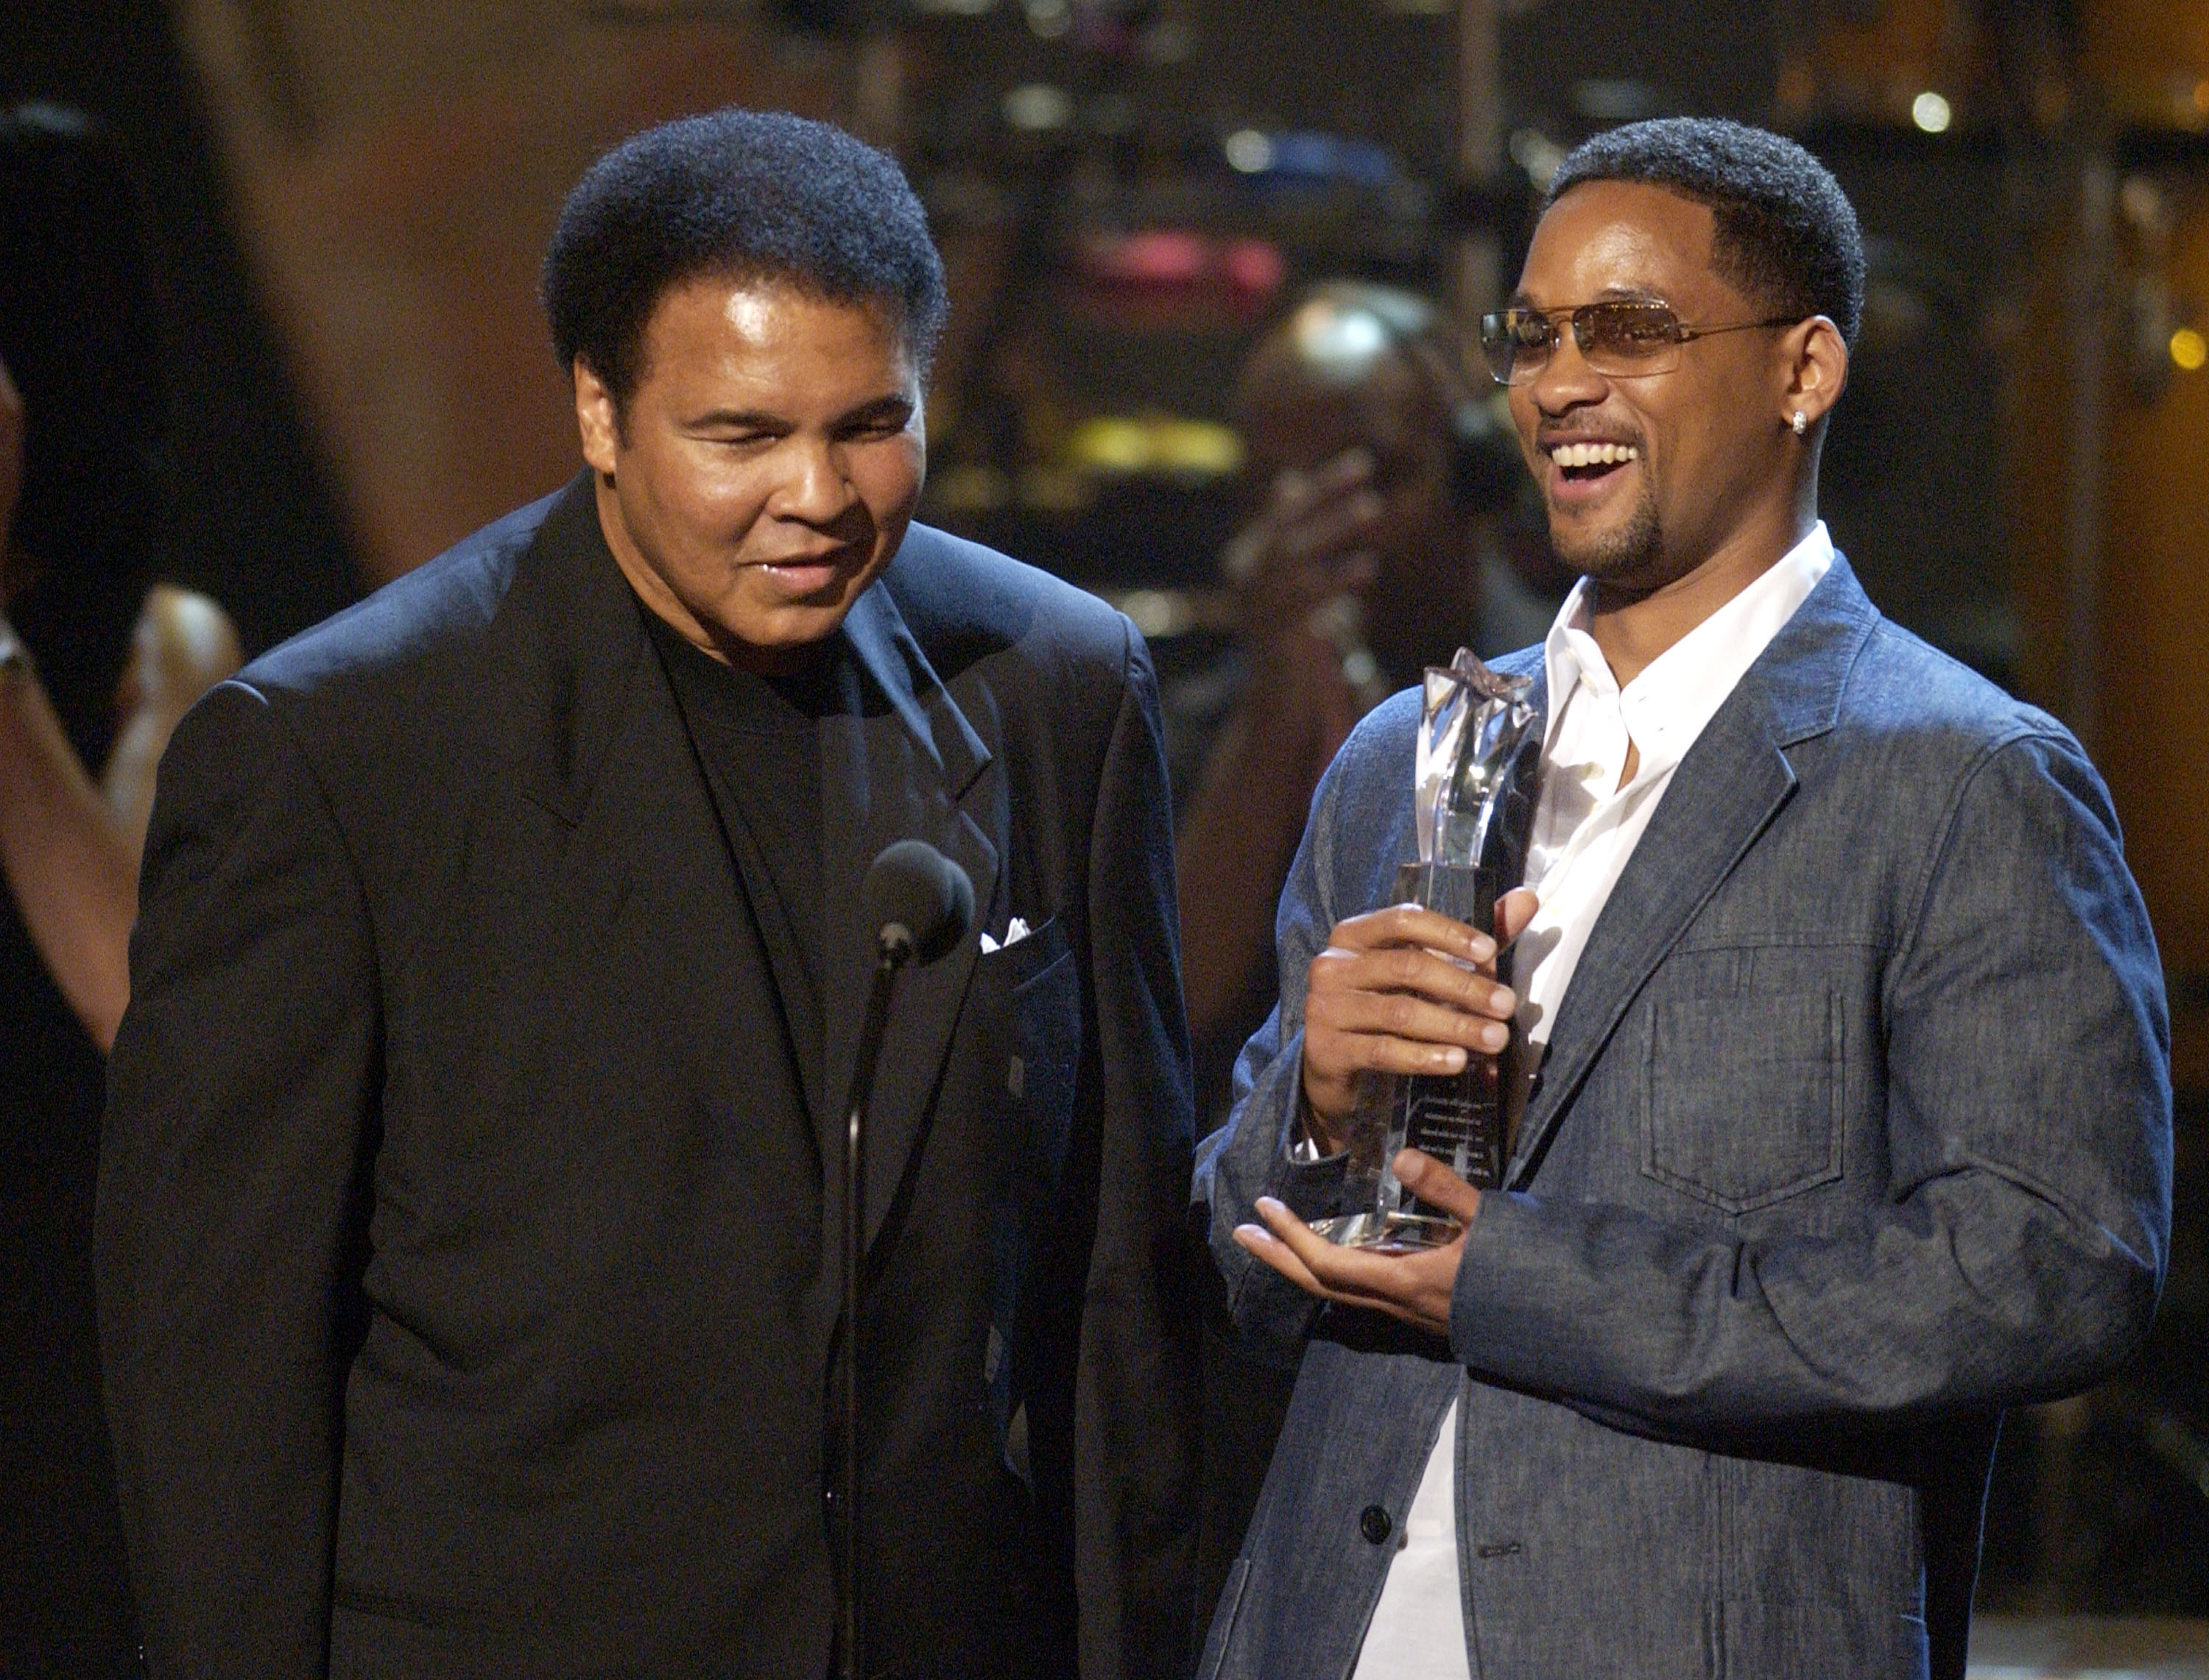 Muhammad Ali accepting his Humanitarian Award from presenter Will Smith during the 2nd annual BET Awards in Los Angeles on June 25, 2002.